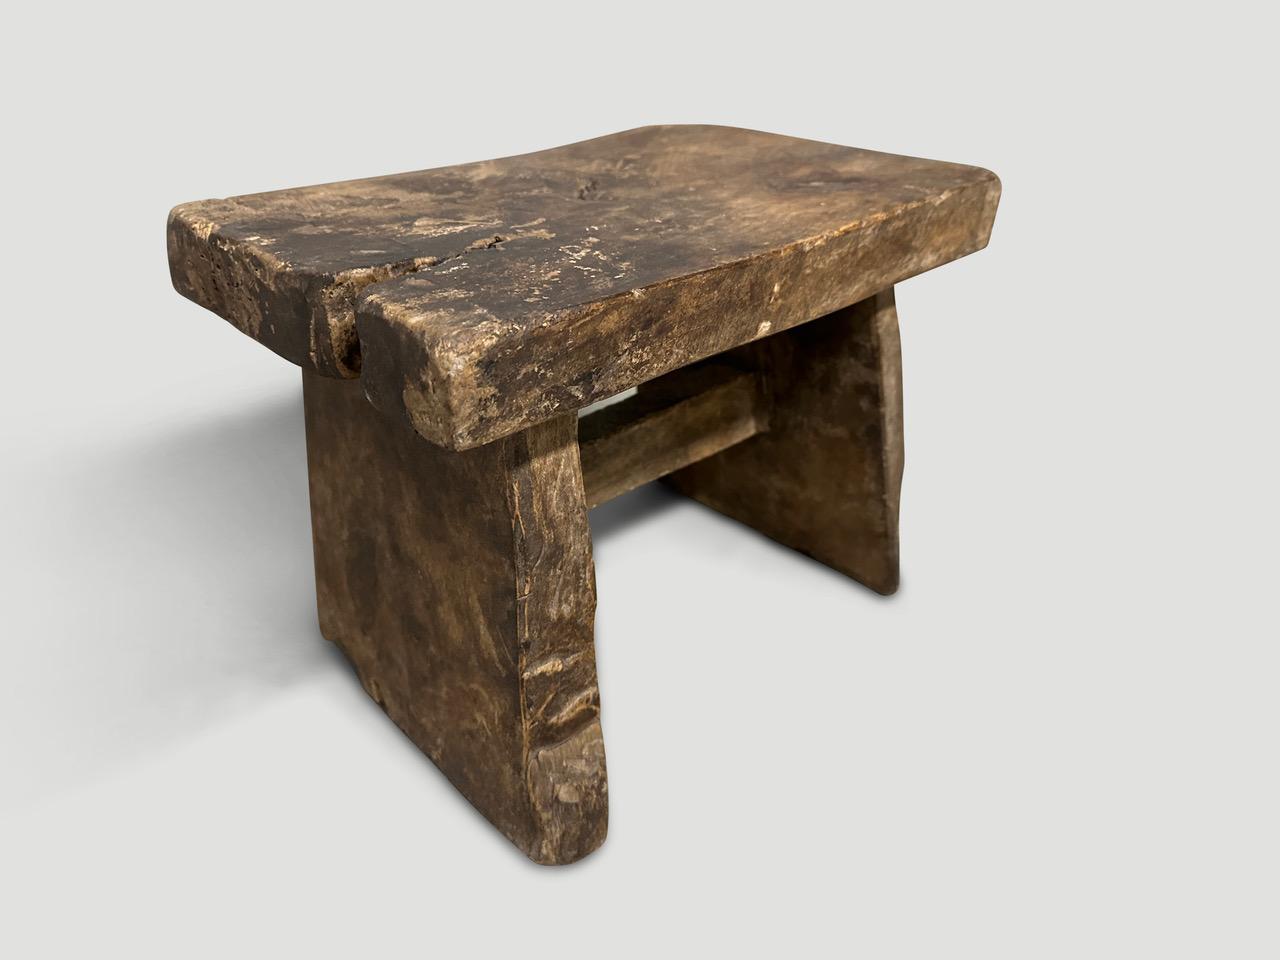 Andrianna Shamaris Wabi Sabi Teak Wood Side Table or Stool In Excellent Condition For Sale In New York, NY